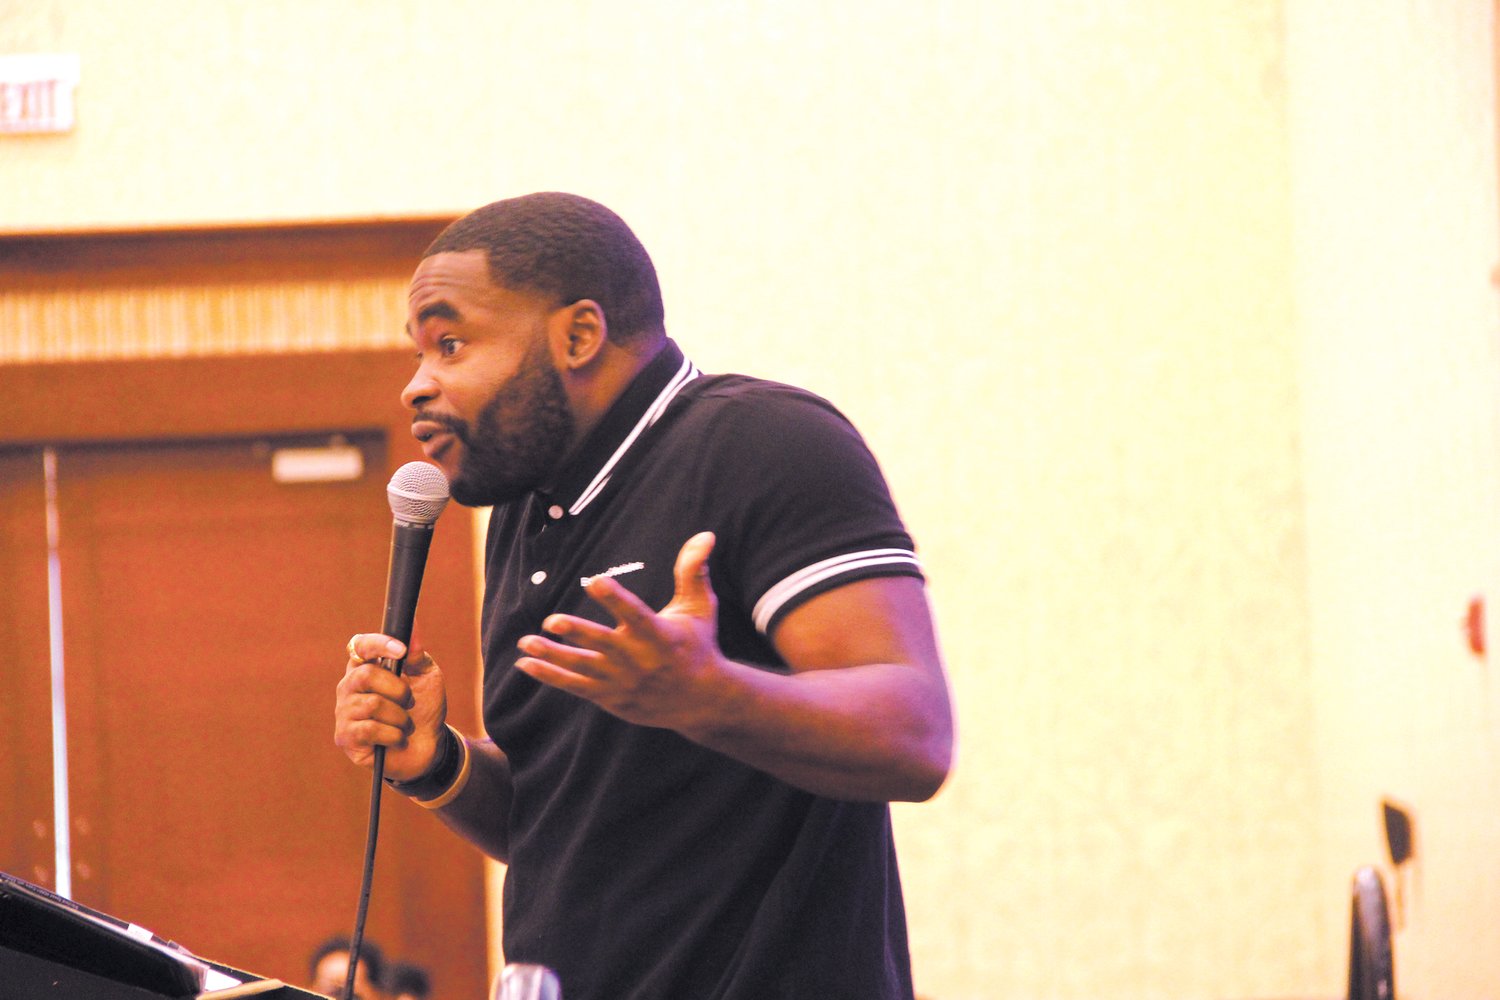 GET THE FLAVOR:  Luckson Omoh Omoaregba is an Upward Bound alumni delivered an inspirational message urging students not to be “fooled into putting appearance and aesthetics above flavor and substance.”